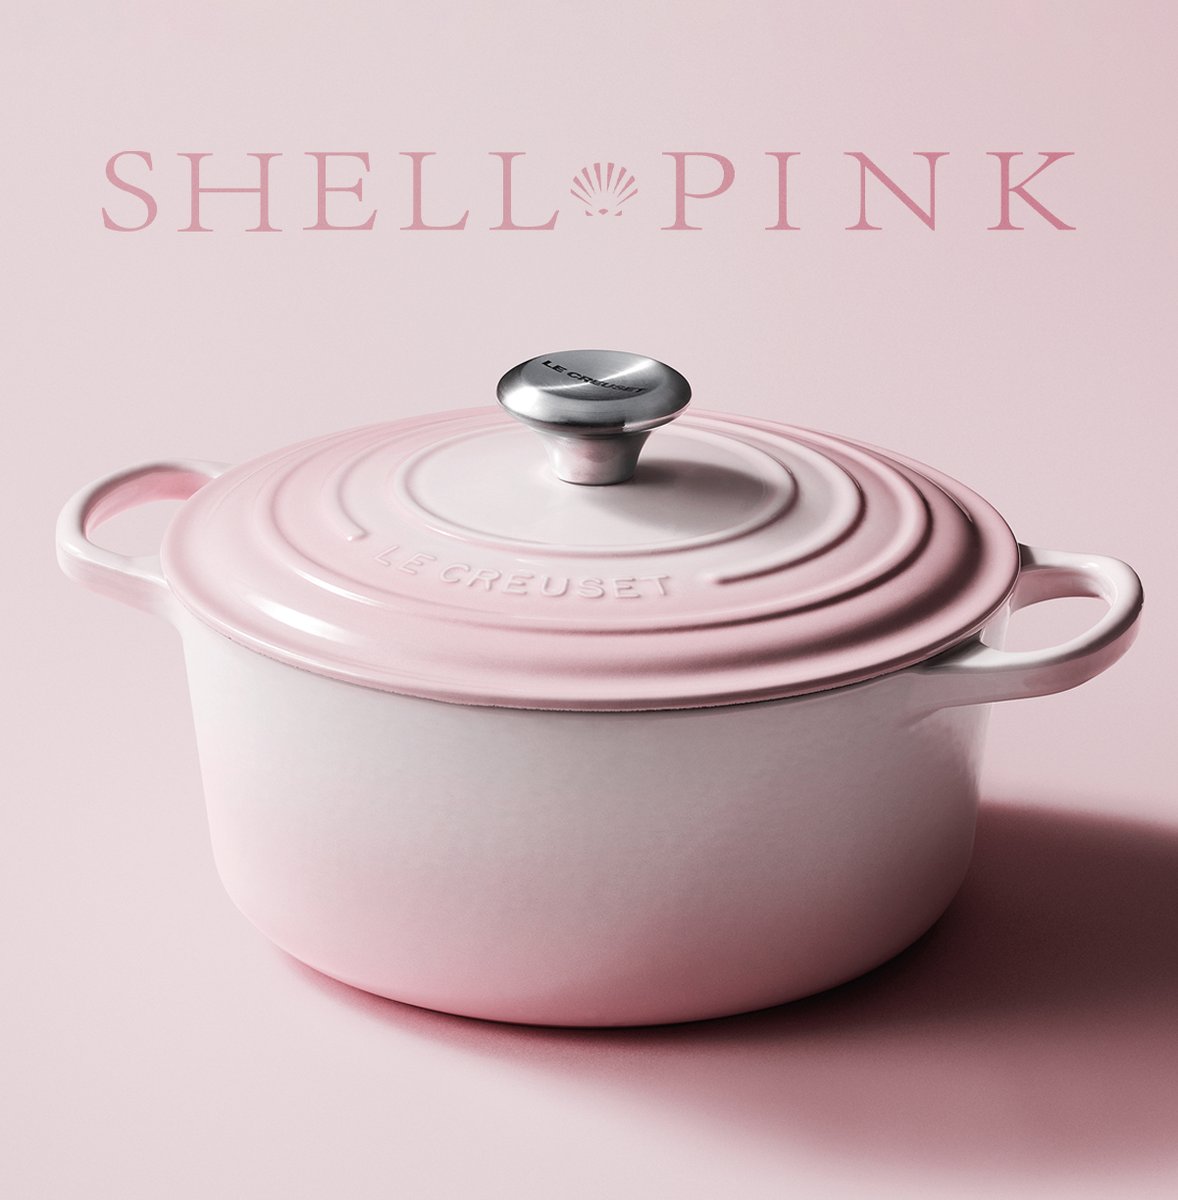 Think Shell Pink this Mother's Day. 💕 Add a soft touch to her kitchen with up to 30% off on this #LeCreuset hue. Shop in-store or online; bit.ly/3JQLyq4